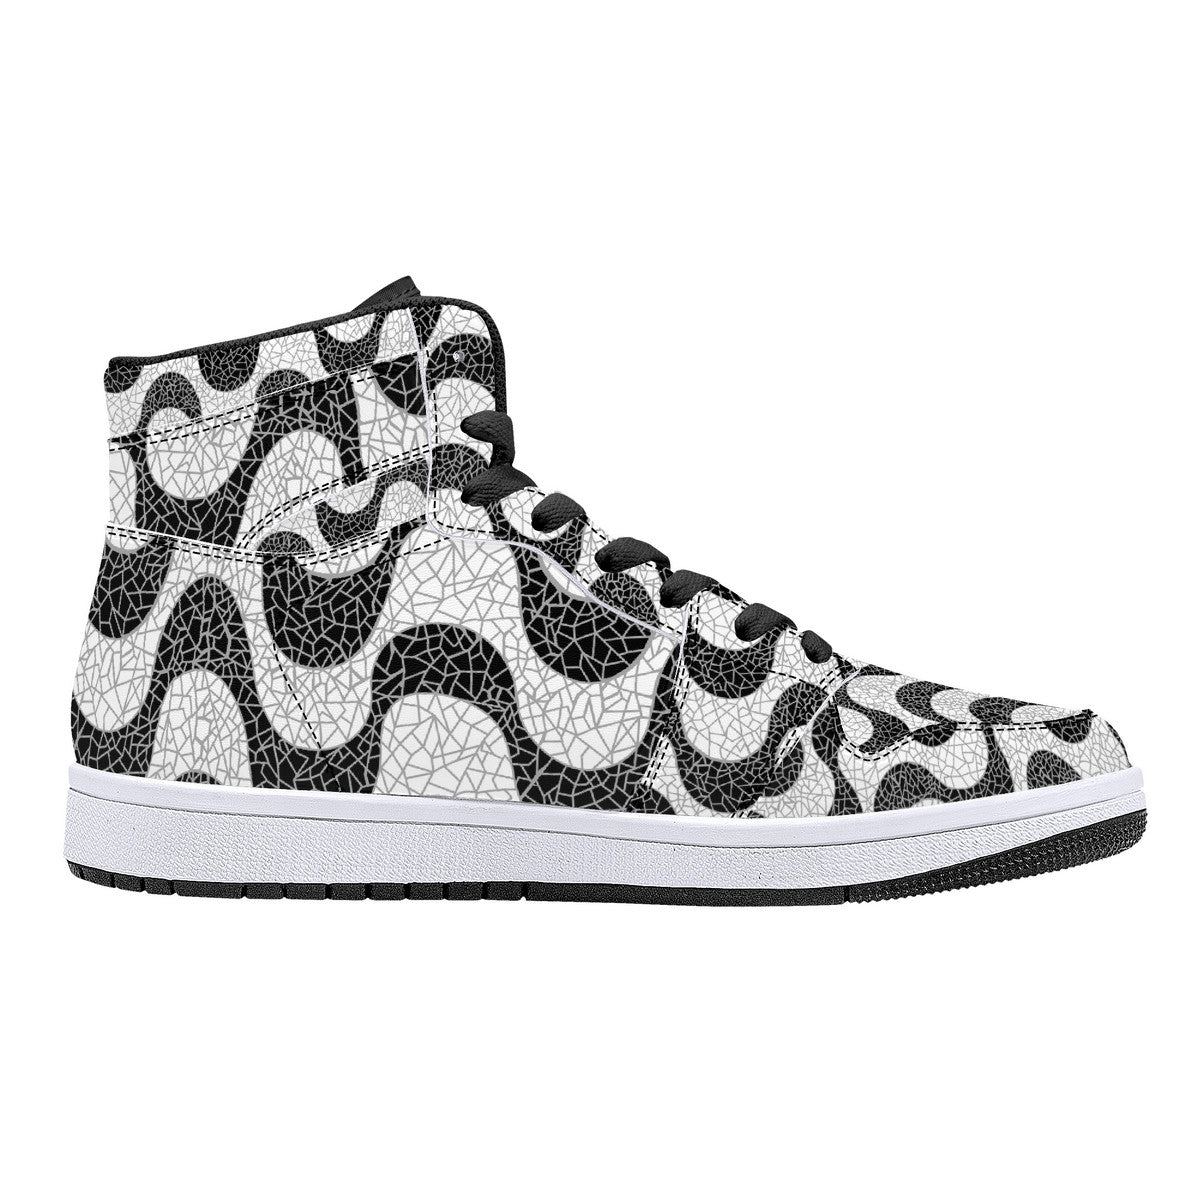 "Copacabana" High-Top Synthetic Leather Sneakers